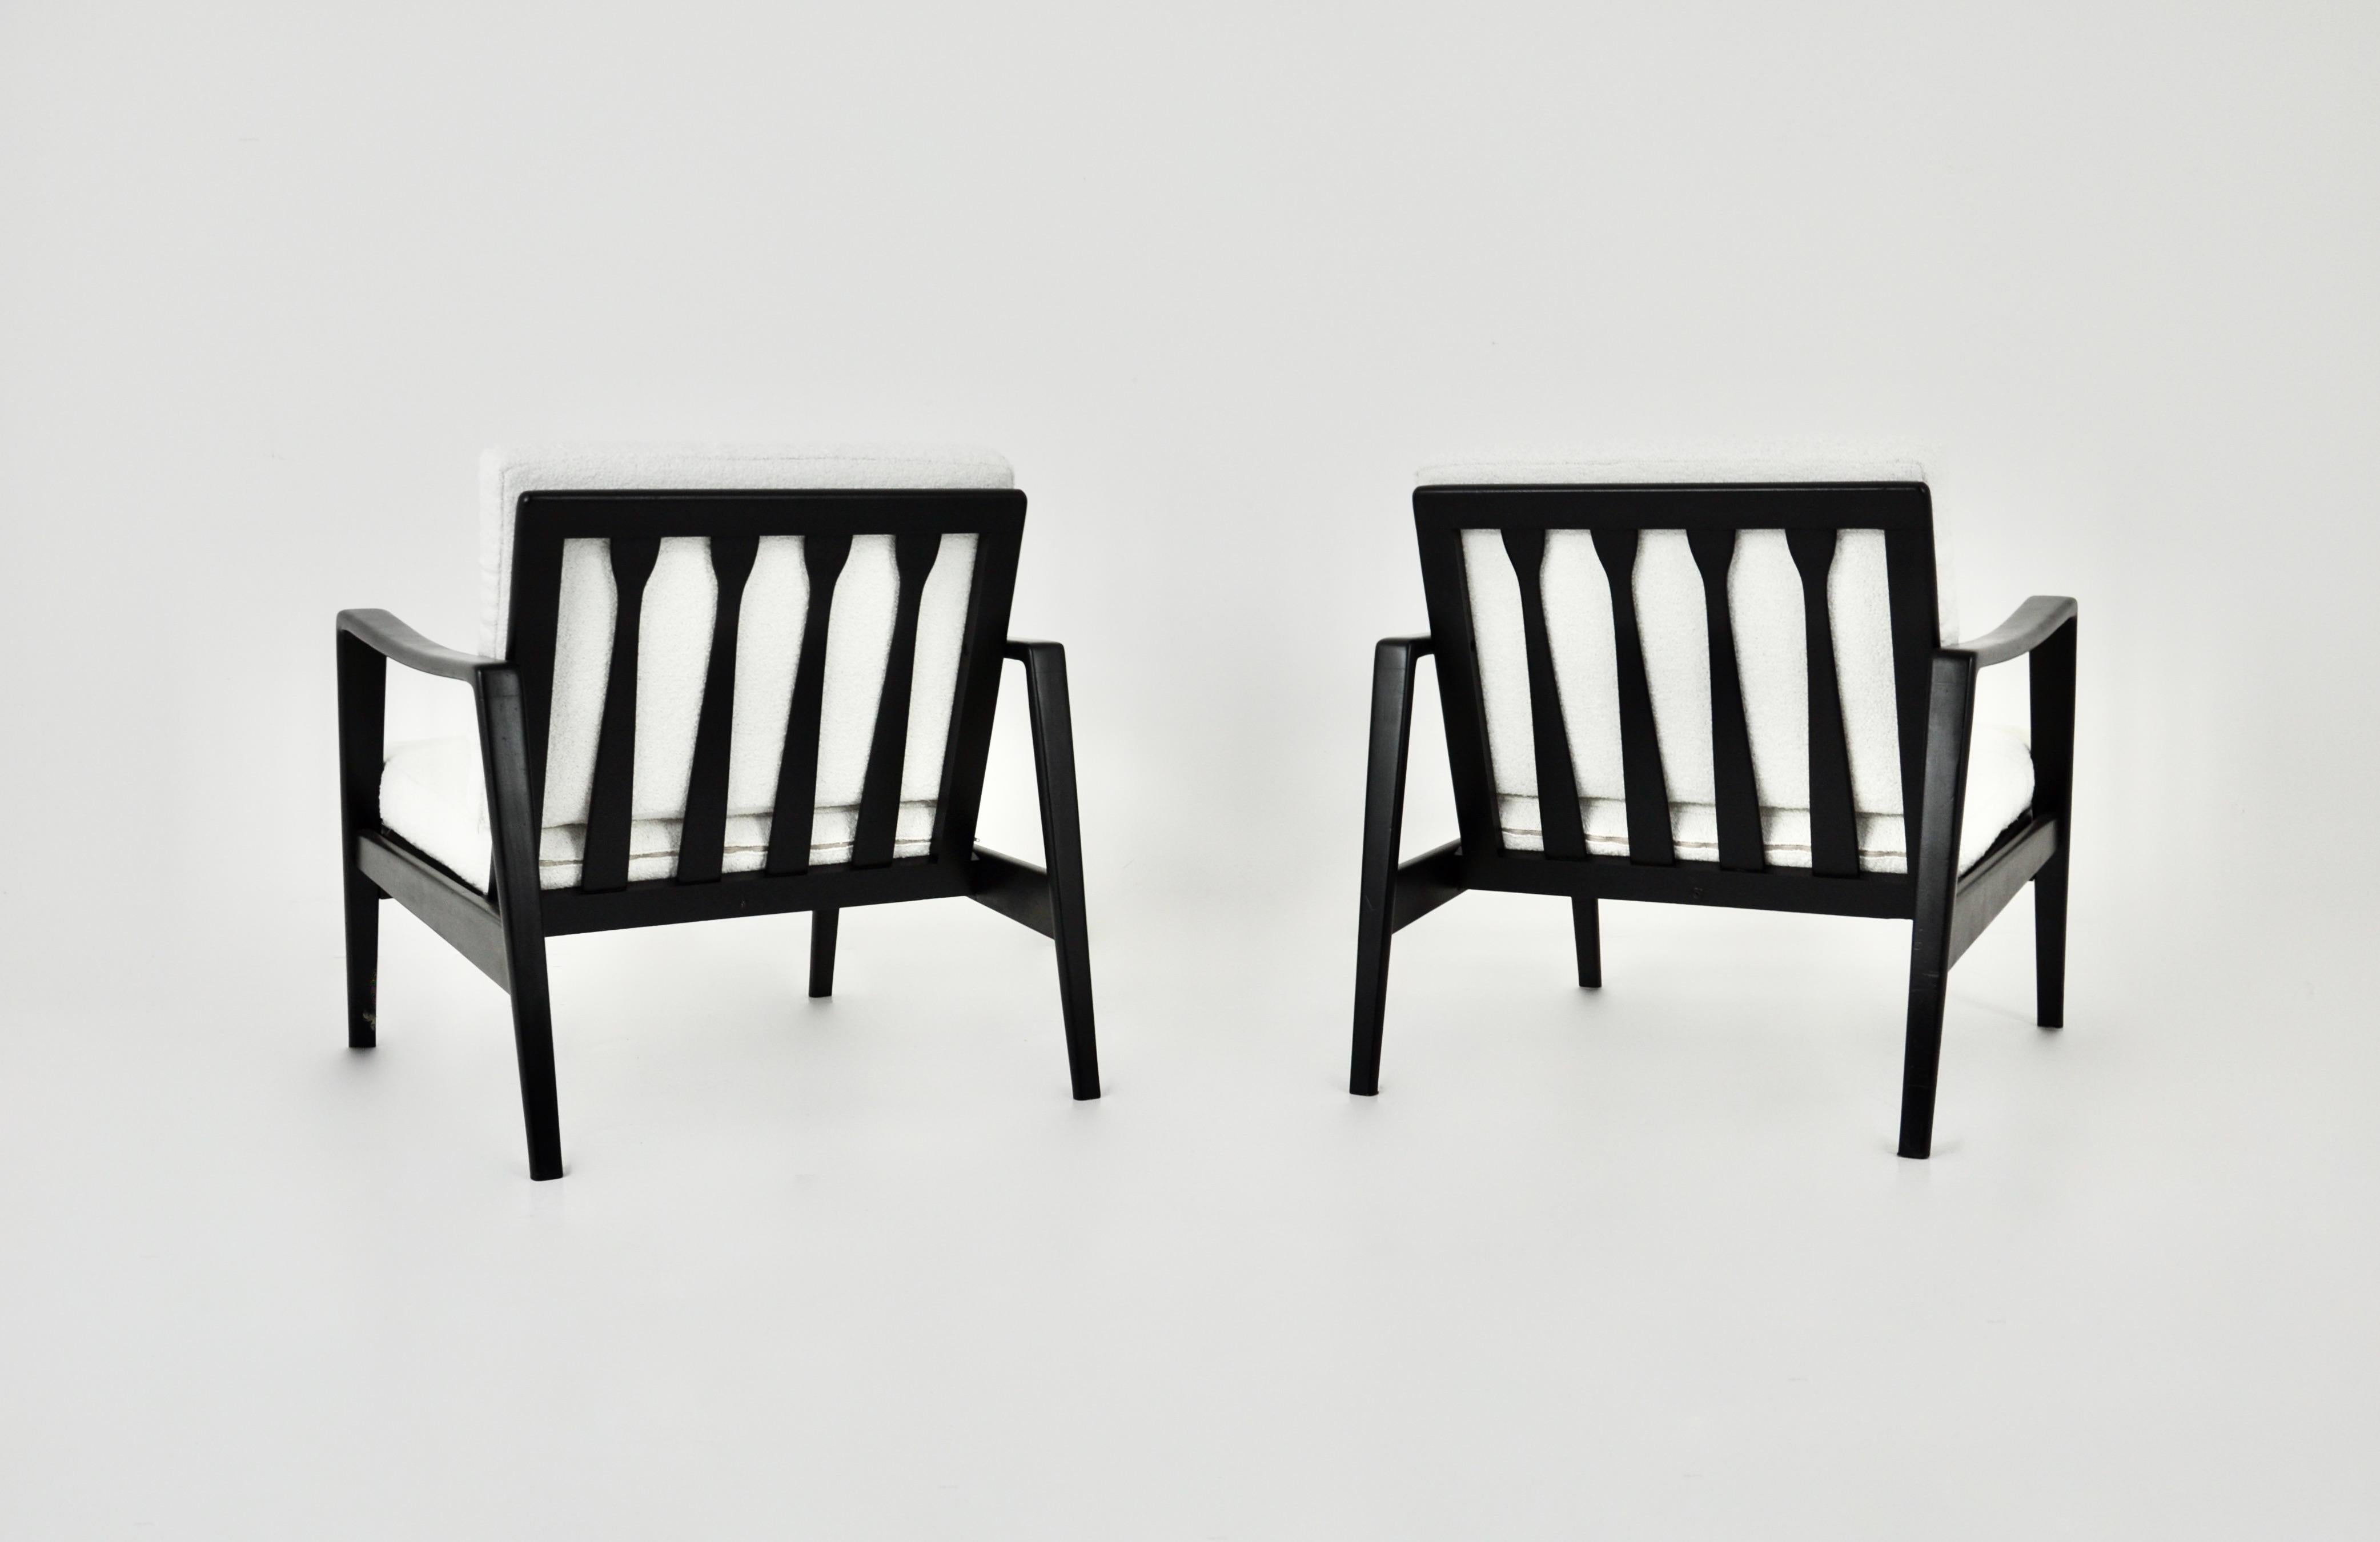 Mid-20th Century Pair of Scandinavian Lounge Chairs by Arne Wahl Iversen for Komfort, 1950s For Sale